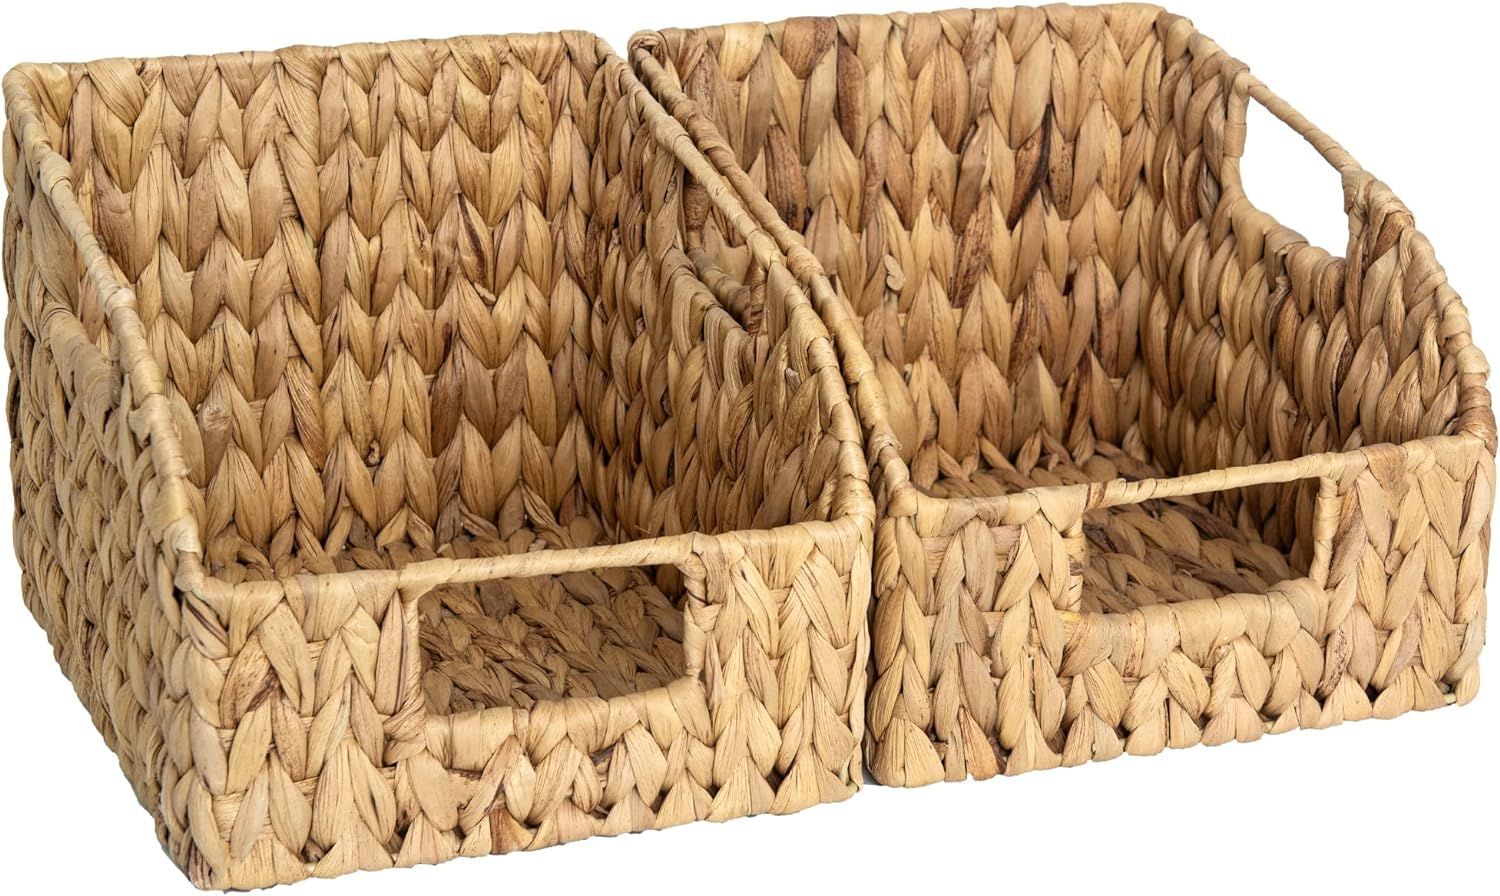 StorageWorks Storage Baskets for Organizing, Wicker Baskets with Built-in Handles, Handwoven Wick... | Amazon (US)